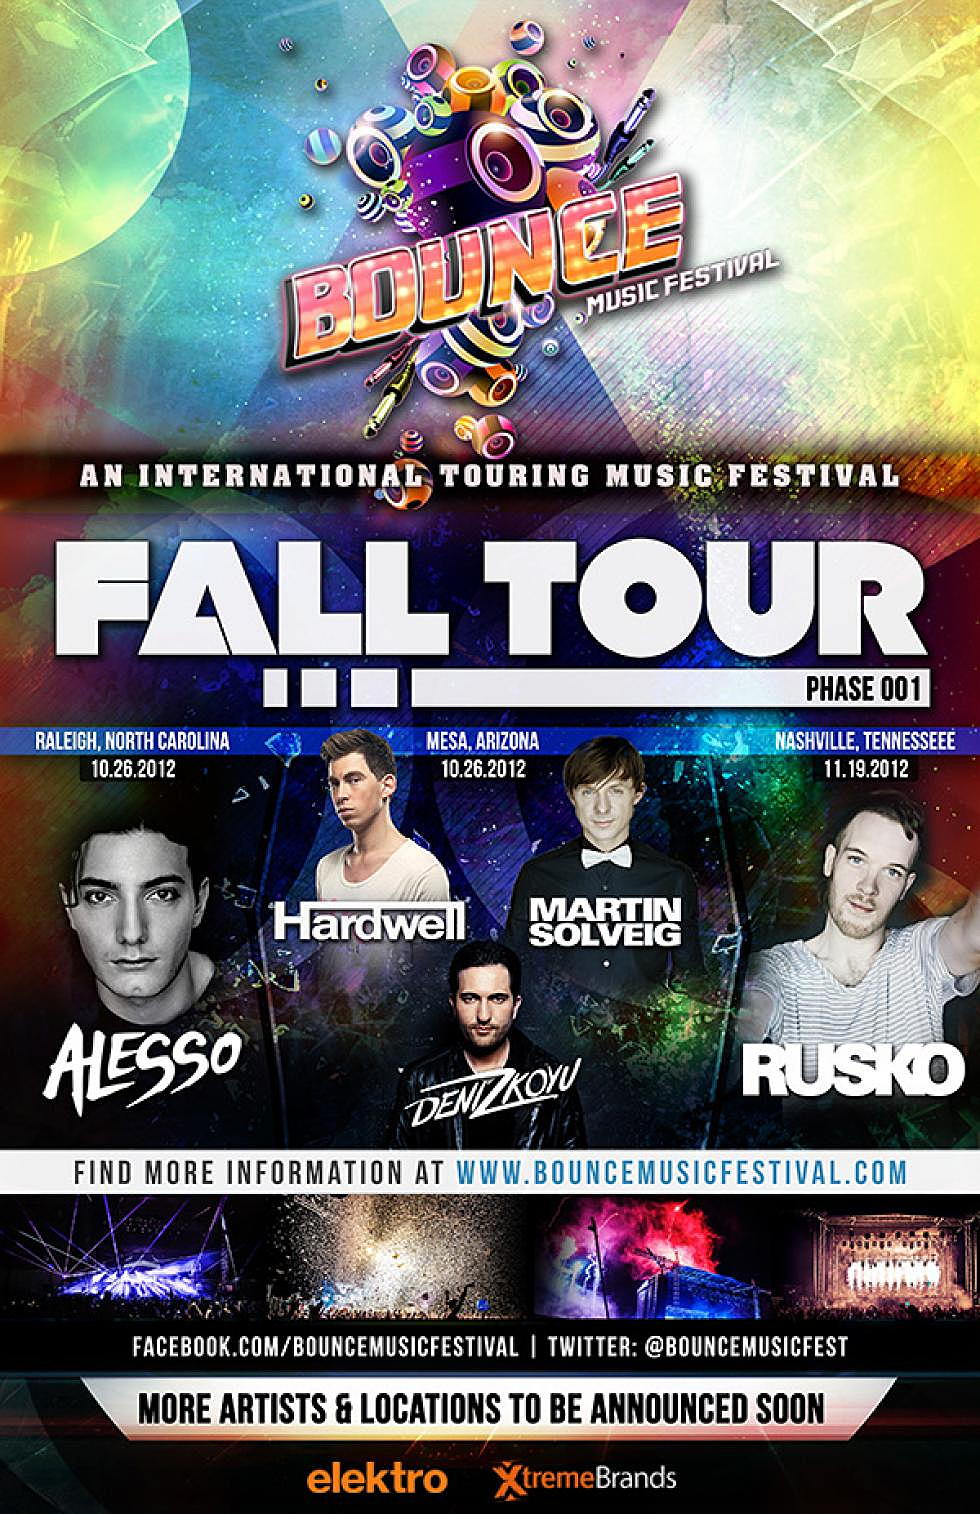 BOUNCE MUSIC FESTIVAL ANNOUNCES PHASE 1 OF FALL TOUR w/ Hardwell, Alesso, Rusko, &#038; Martin Solveig